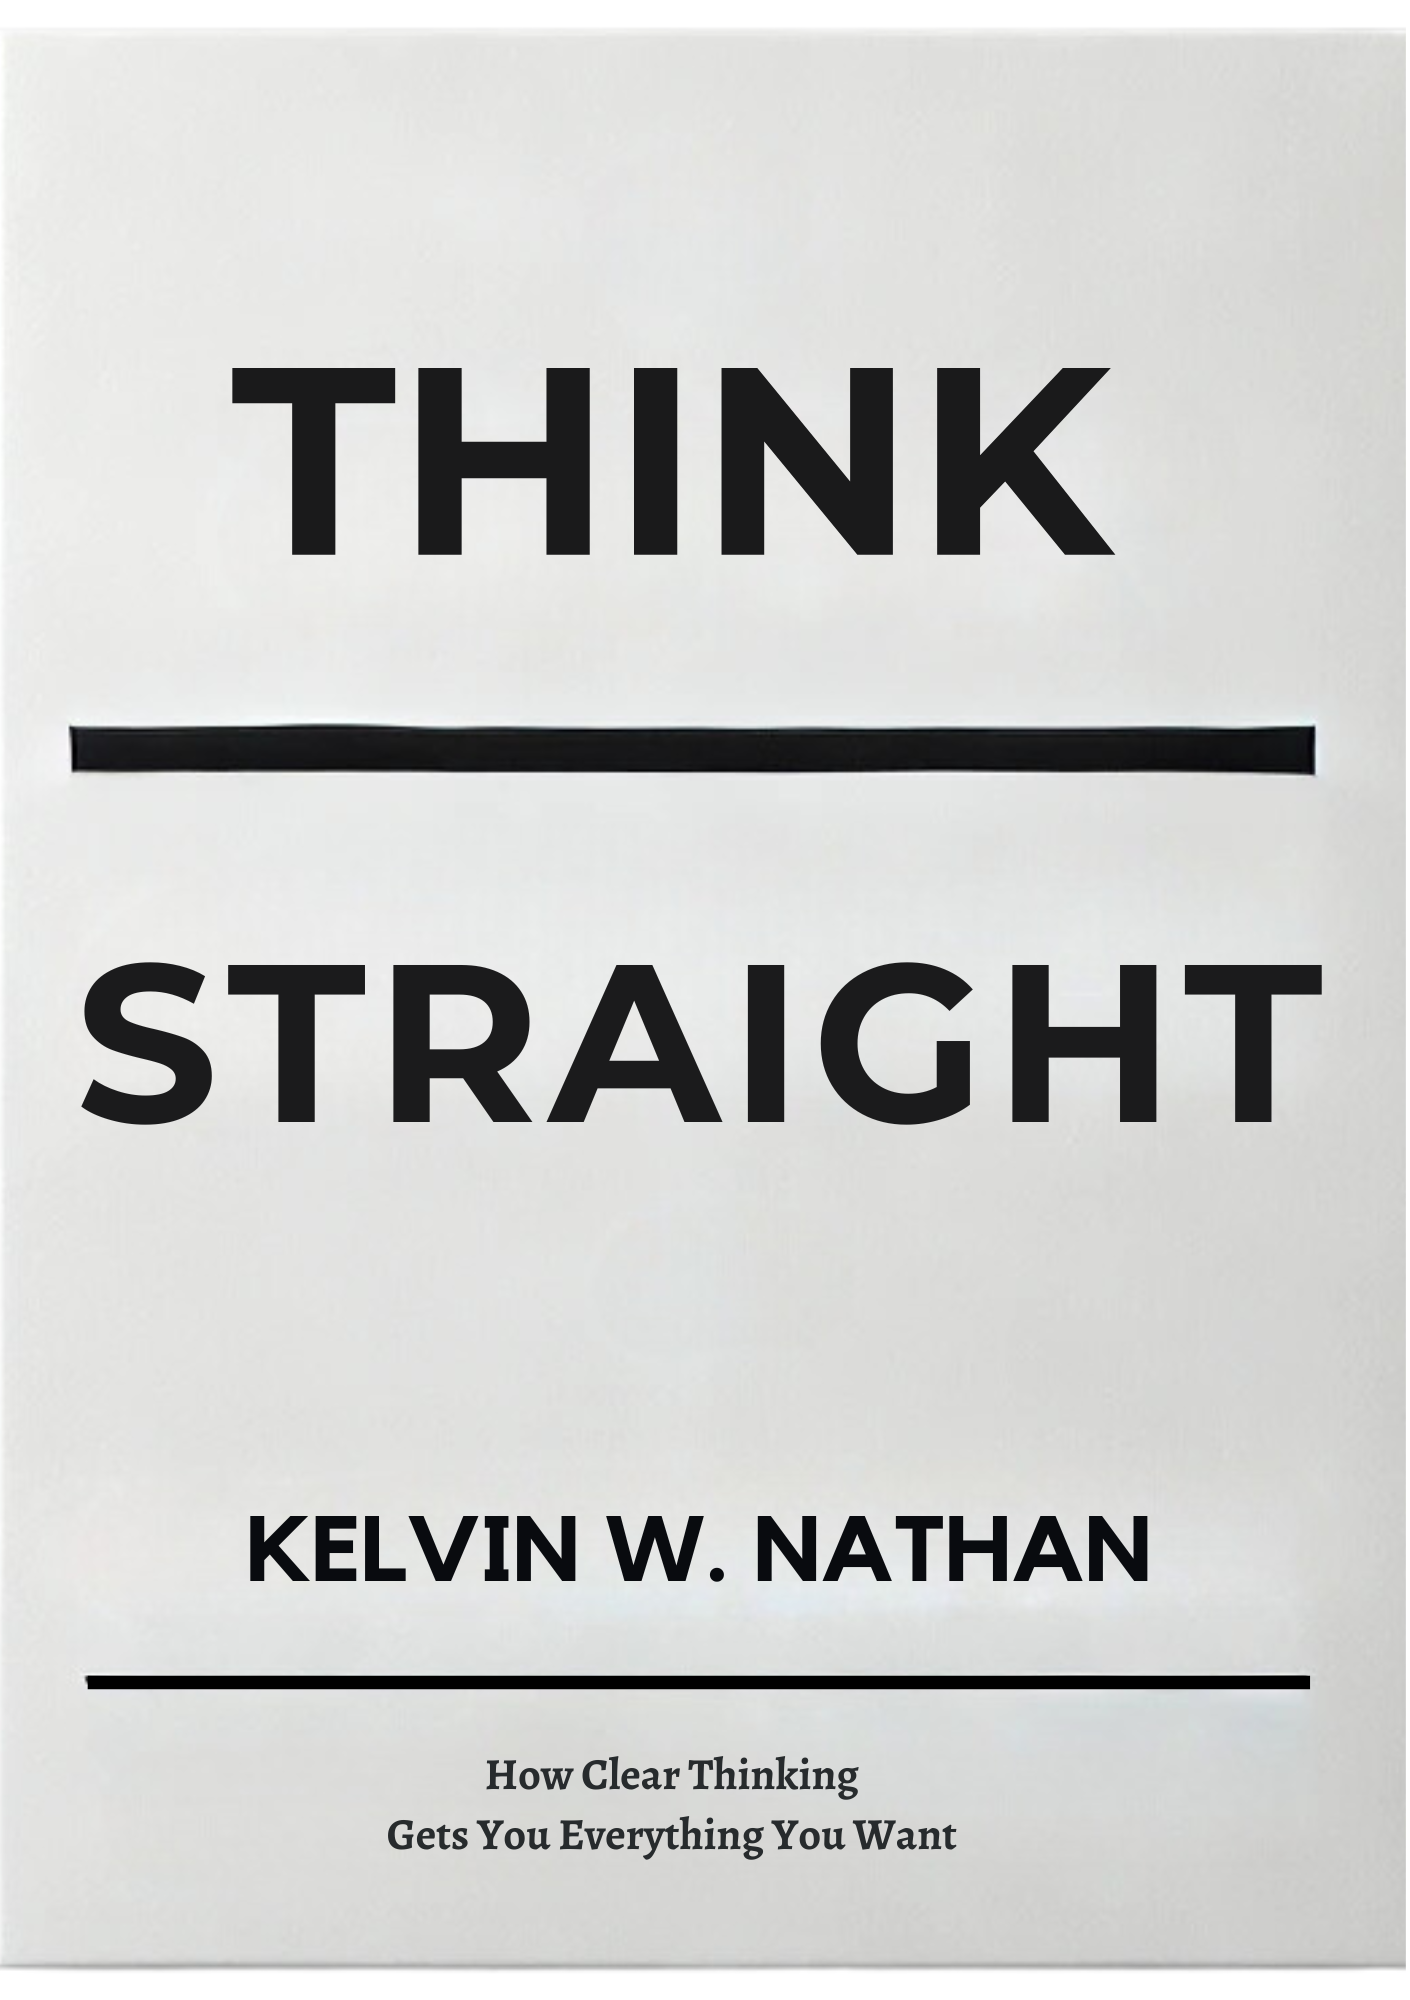 Think Straight: How Clear Thinking Gets You Everything You Want